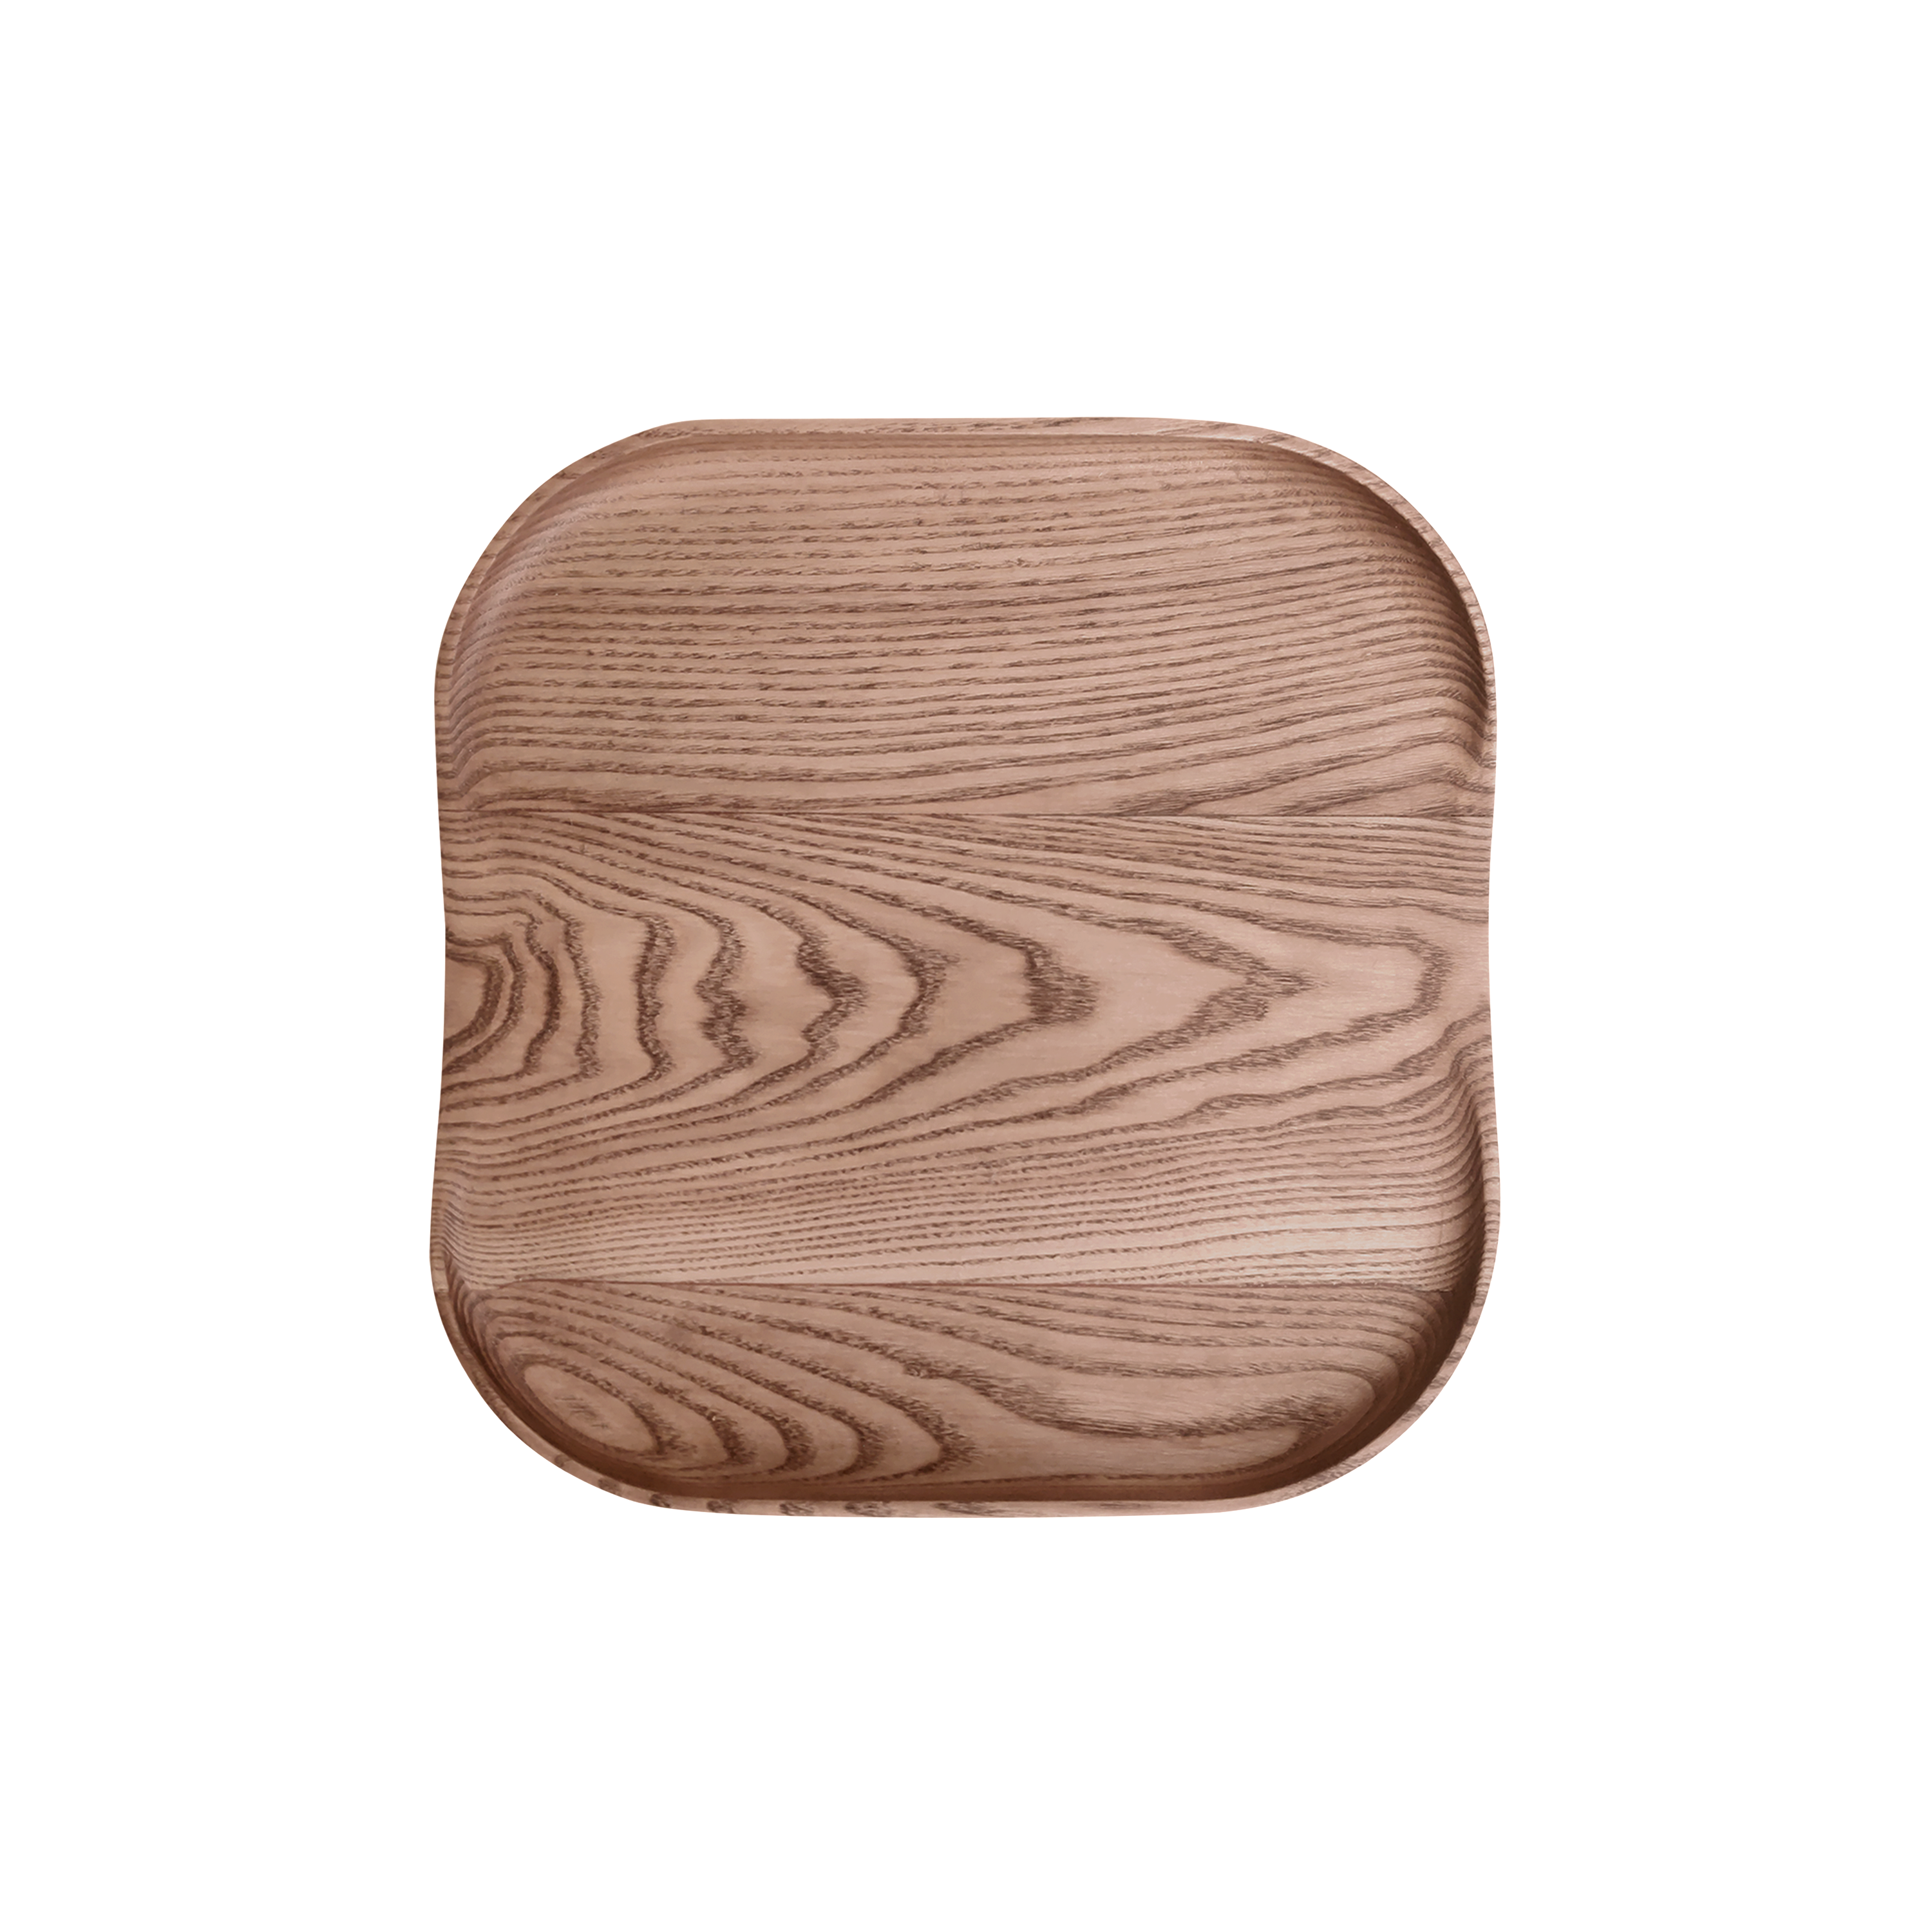 Biarc Wooden Tray